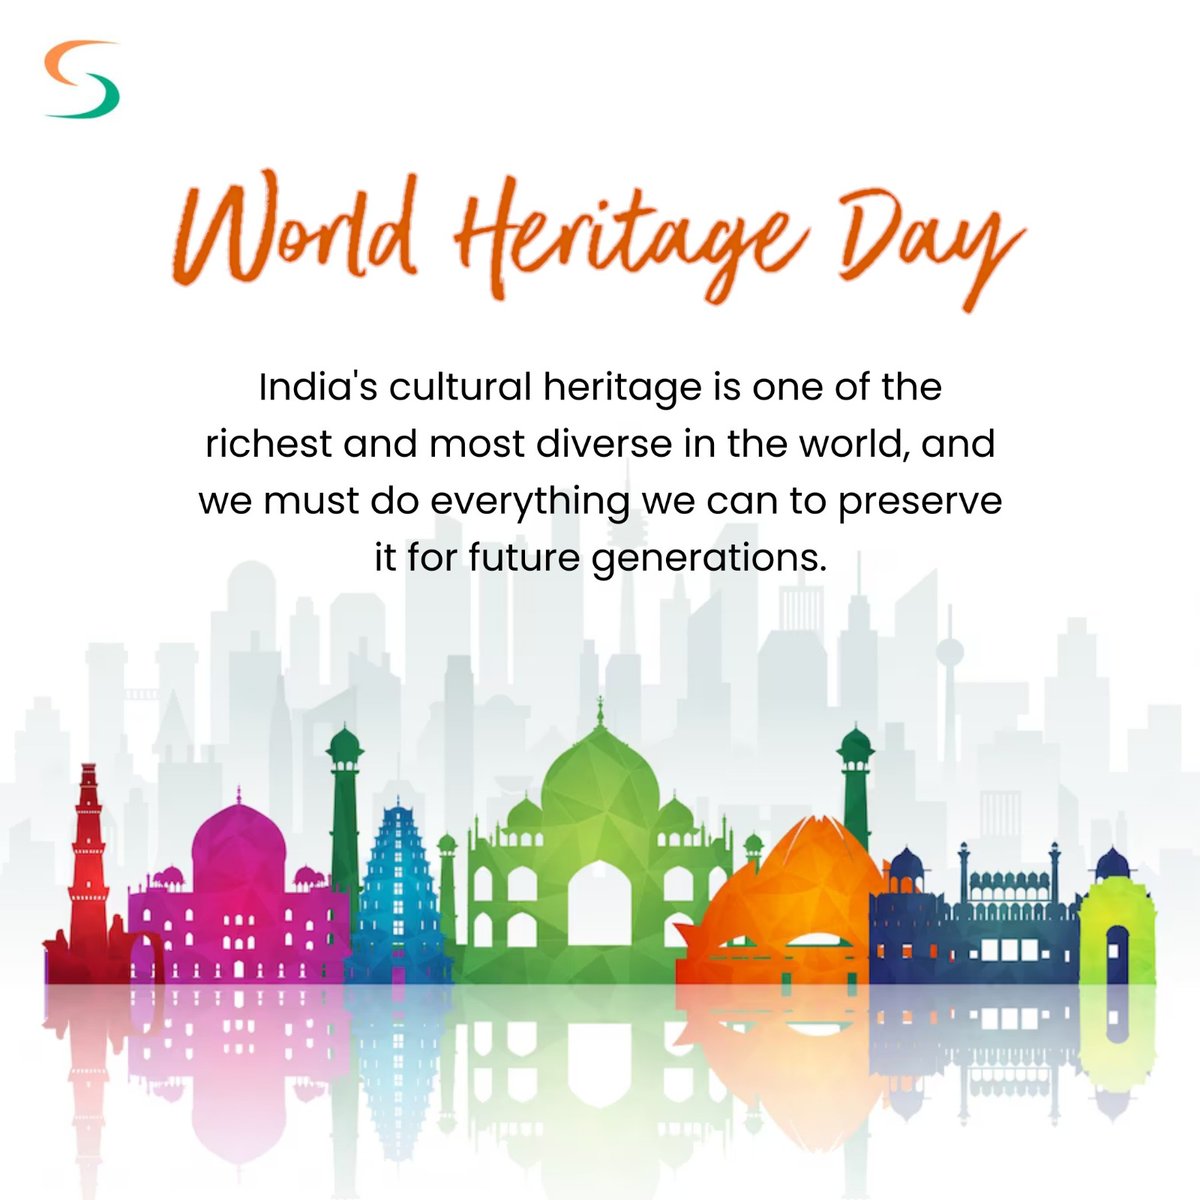 'World Heritage Day is a reminder of the value and significance of our cultural heritage. Let's pledge to preserve it for future generations!'

World Heritage Day

Symphony Infotech

#WorldHeritageDay #CulturalHeritage #PreserveOurPast #HeritageSites #UNESCO #GlobalHeritage